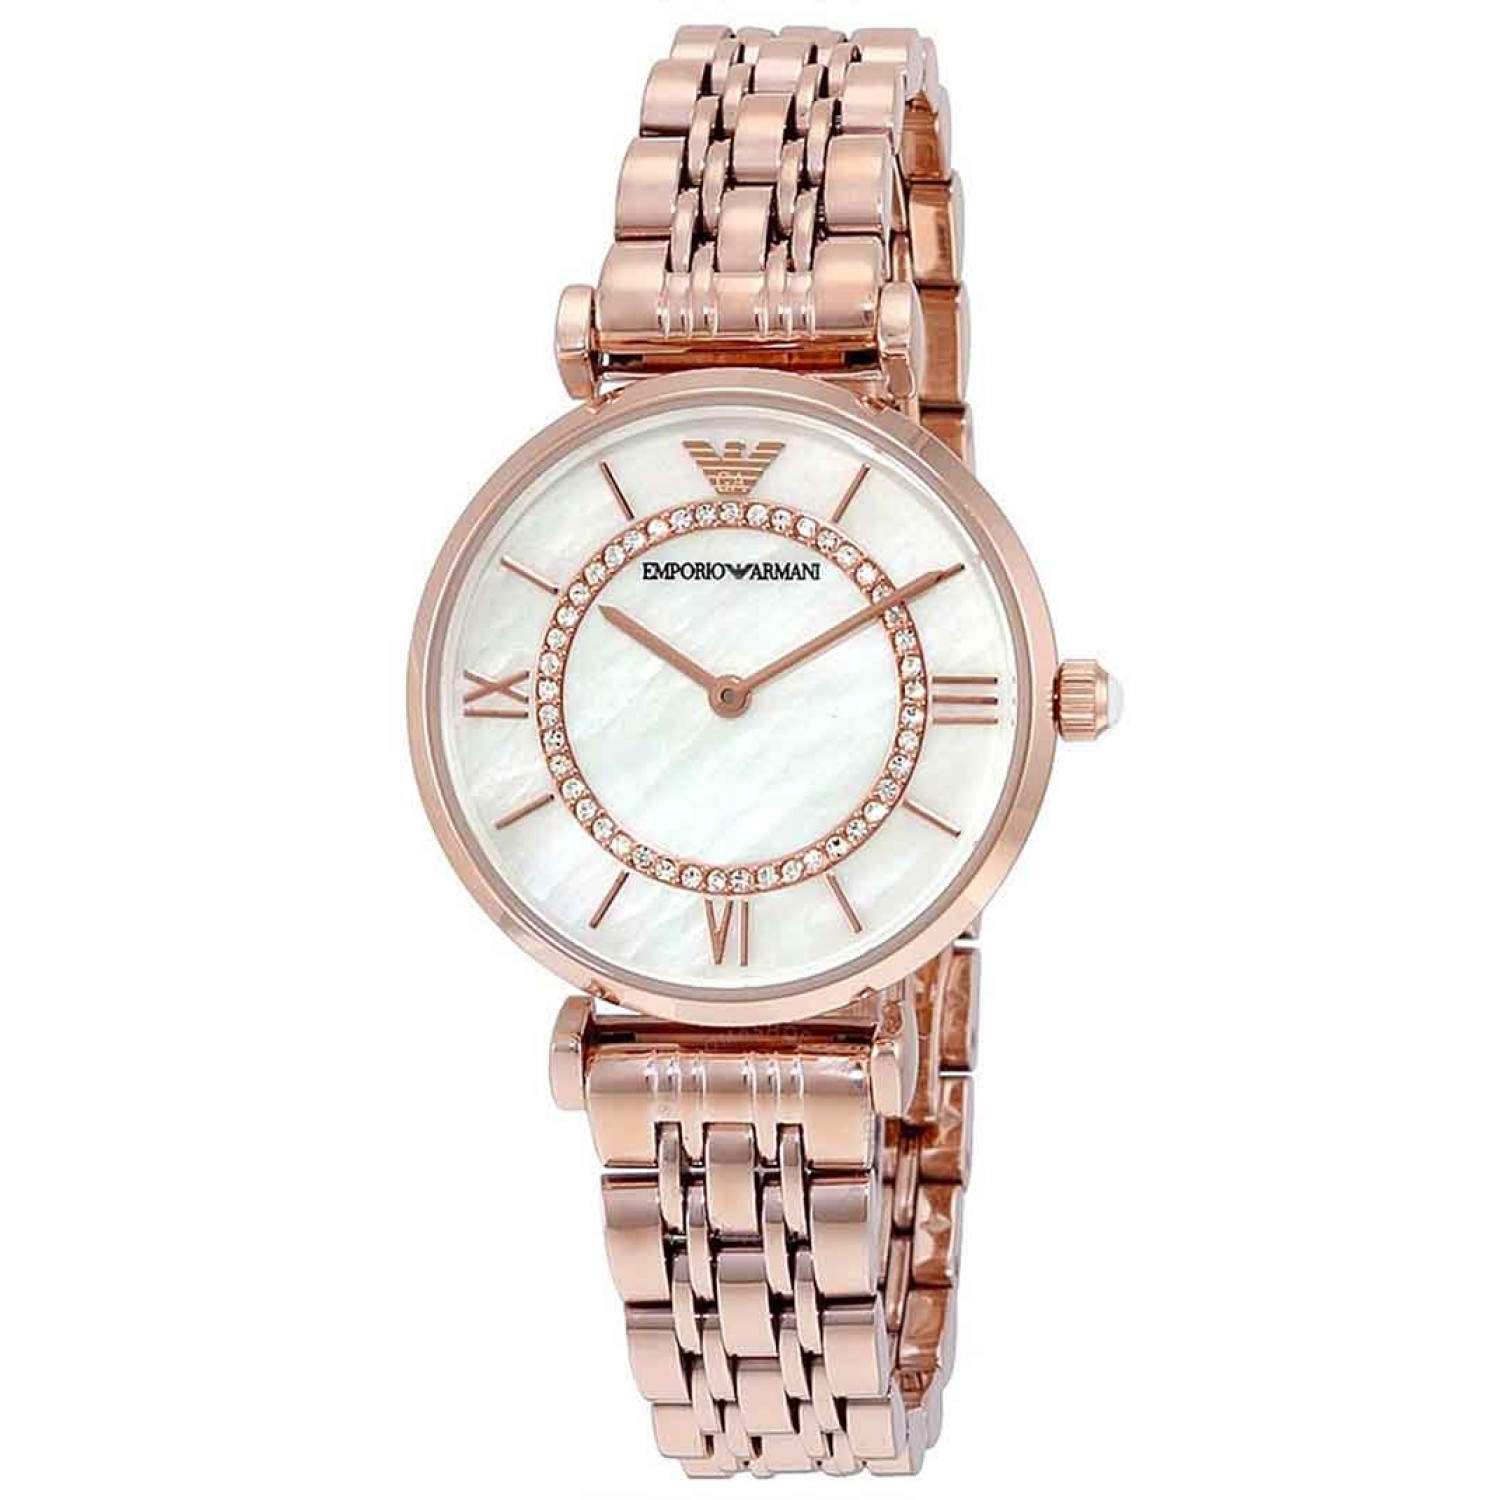 AR1909 Emporio Armani Classic Mother of Pearl Watch. Effortlessly feminine and timeless, the Emporio Armani AR1909 timepiece features a rose gold-tone seven-link bracelet, matching case and a glossy mother-of-pearl dial for a look that exudes chic sophist